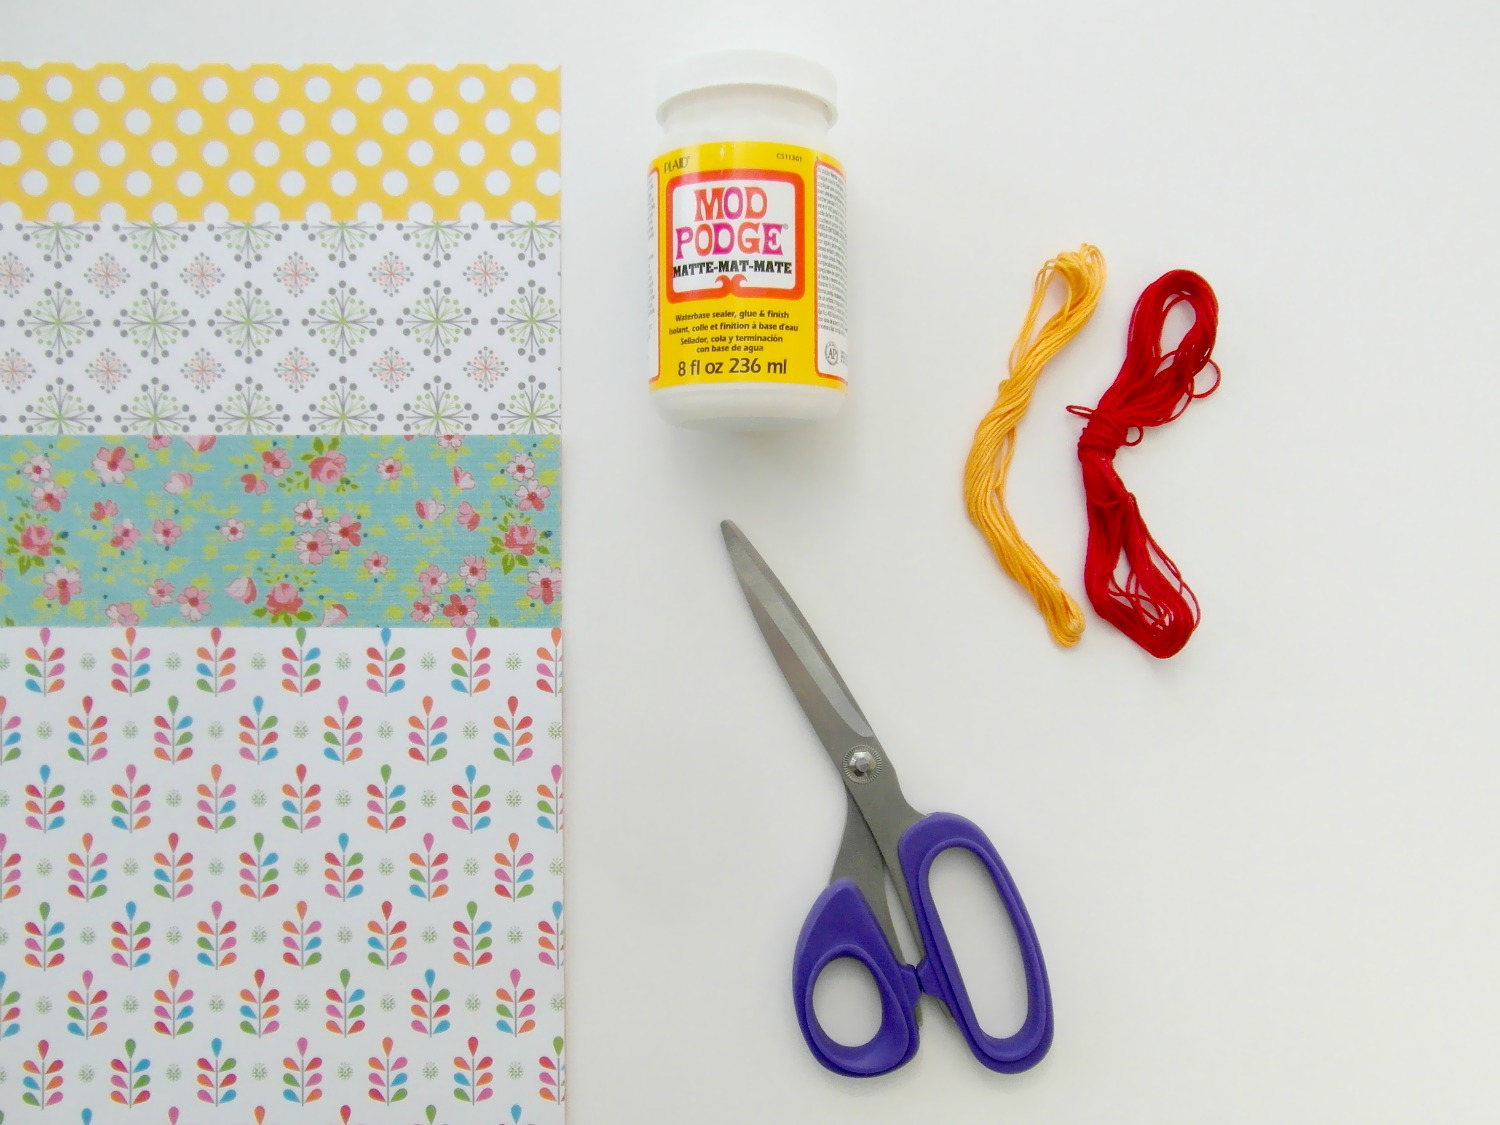 Mod Podge and scrapbooking papers